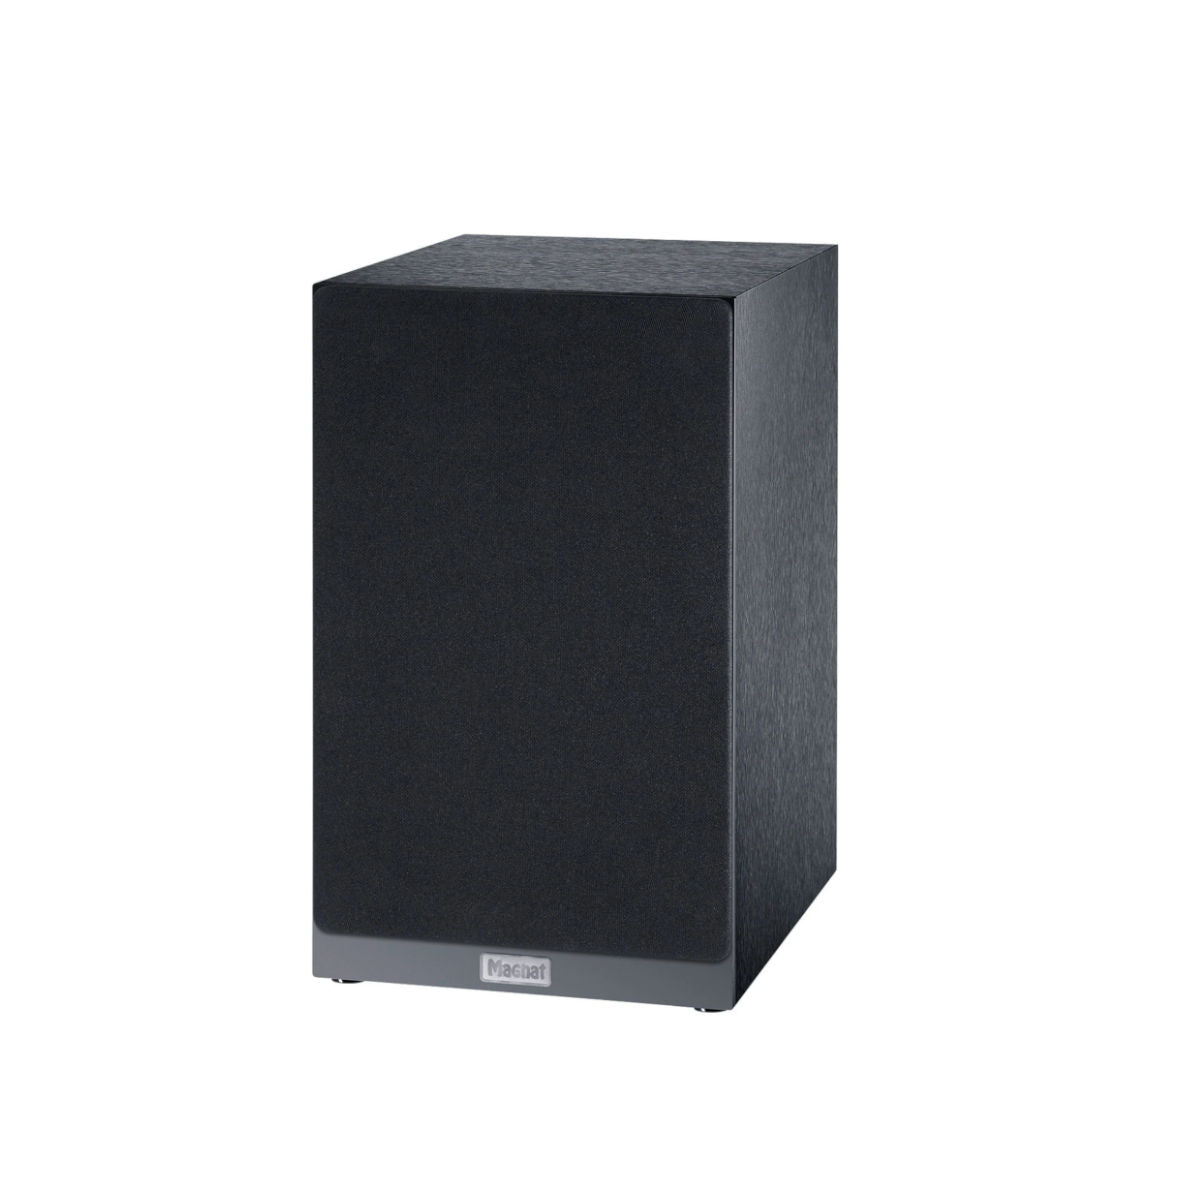 Magnat Multi Monitor 220 Active Stereo Speaker with Phono Input